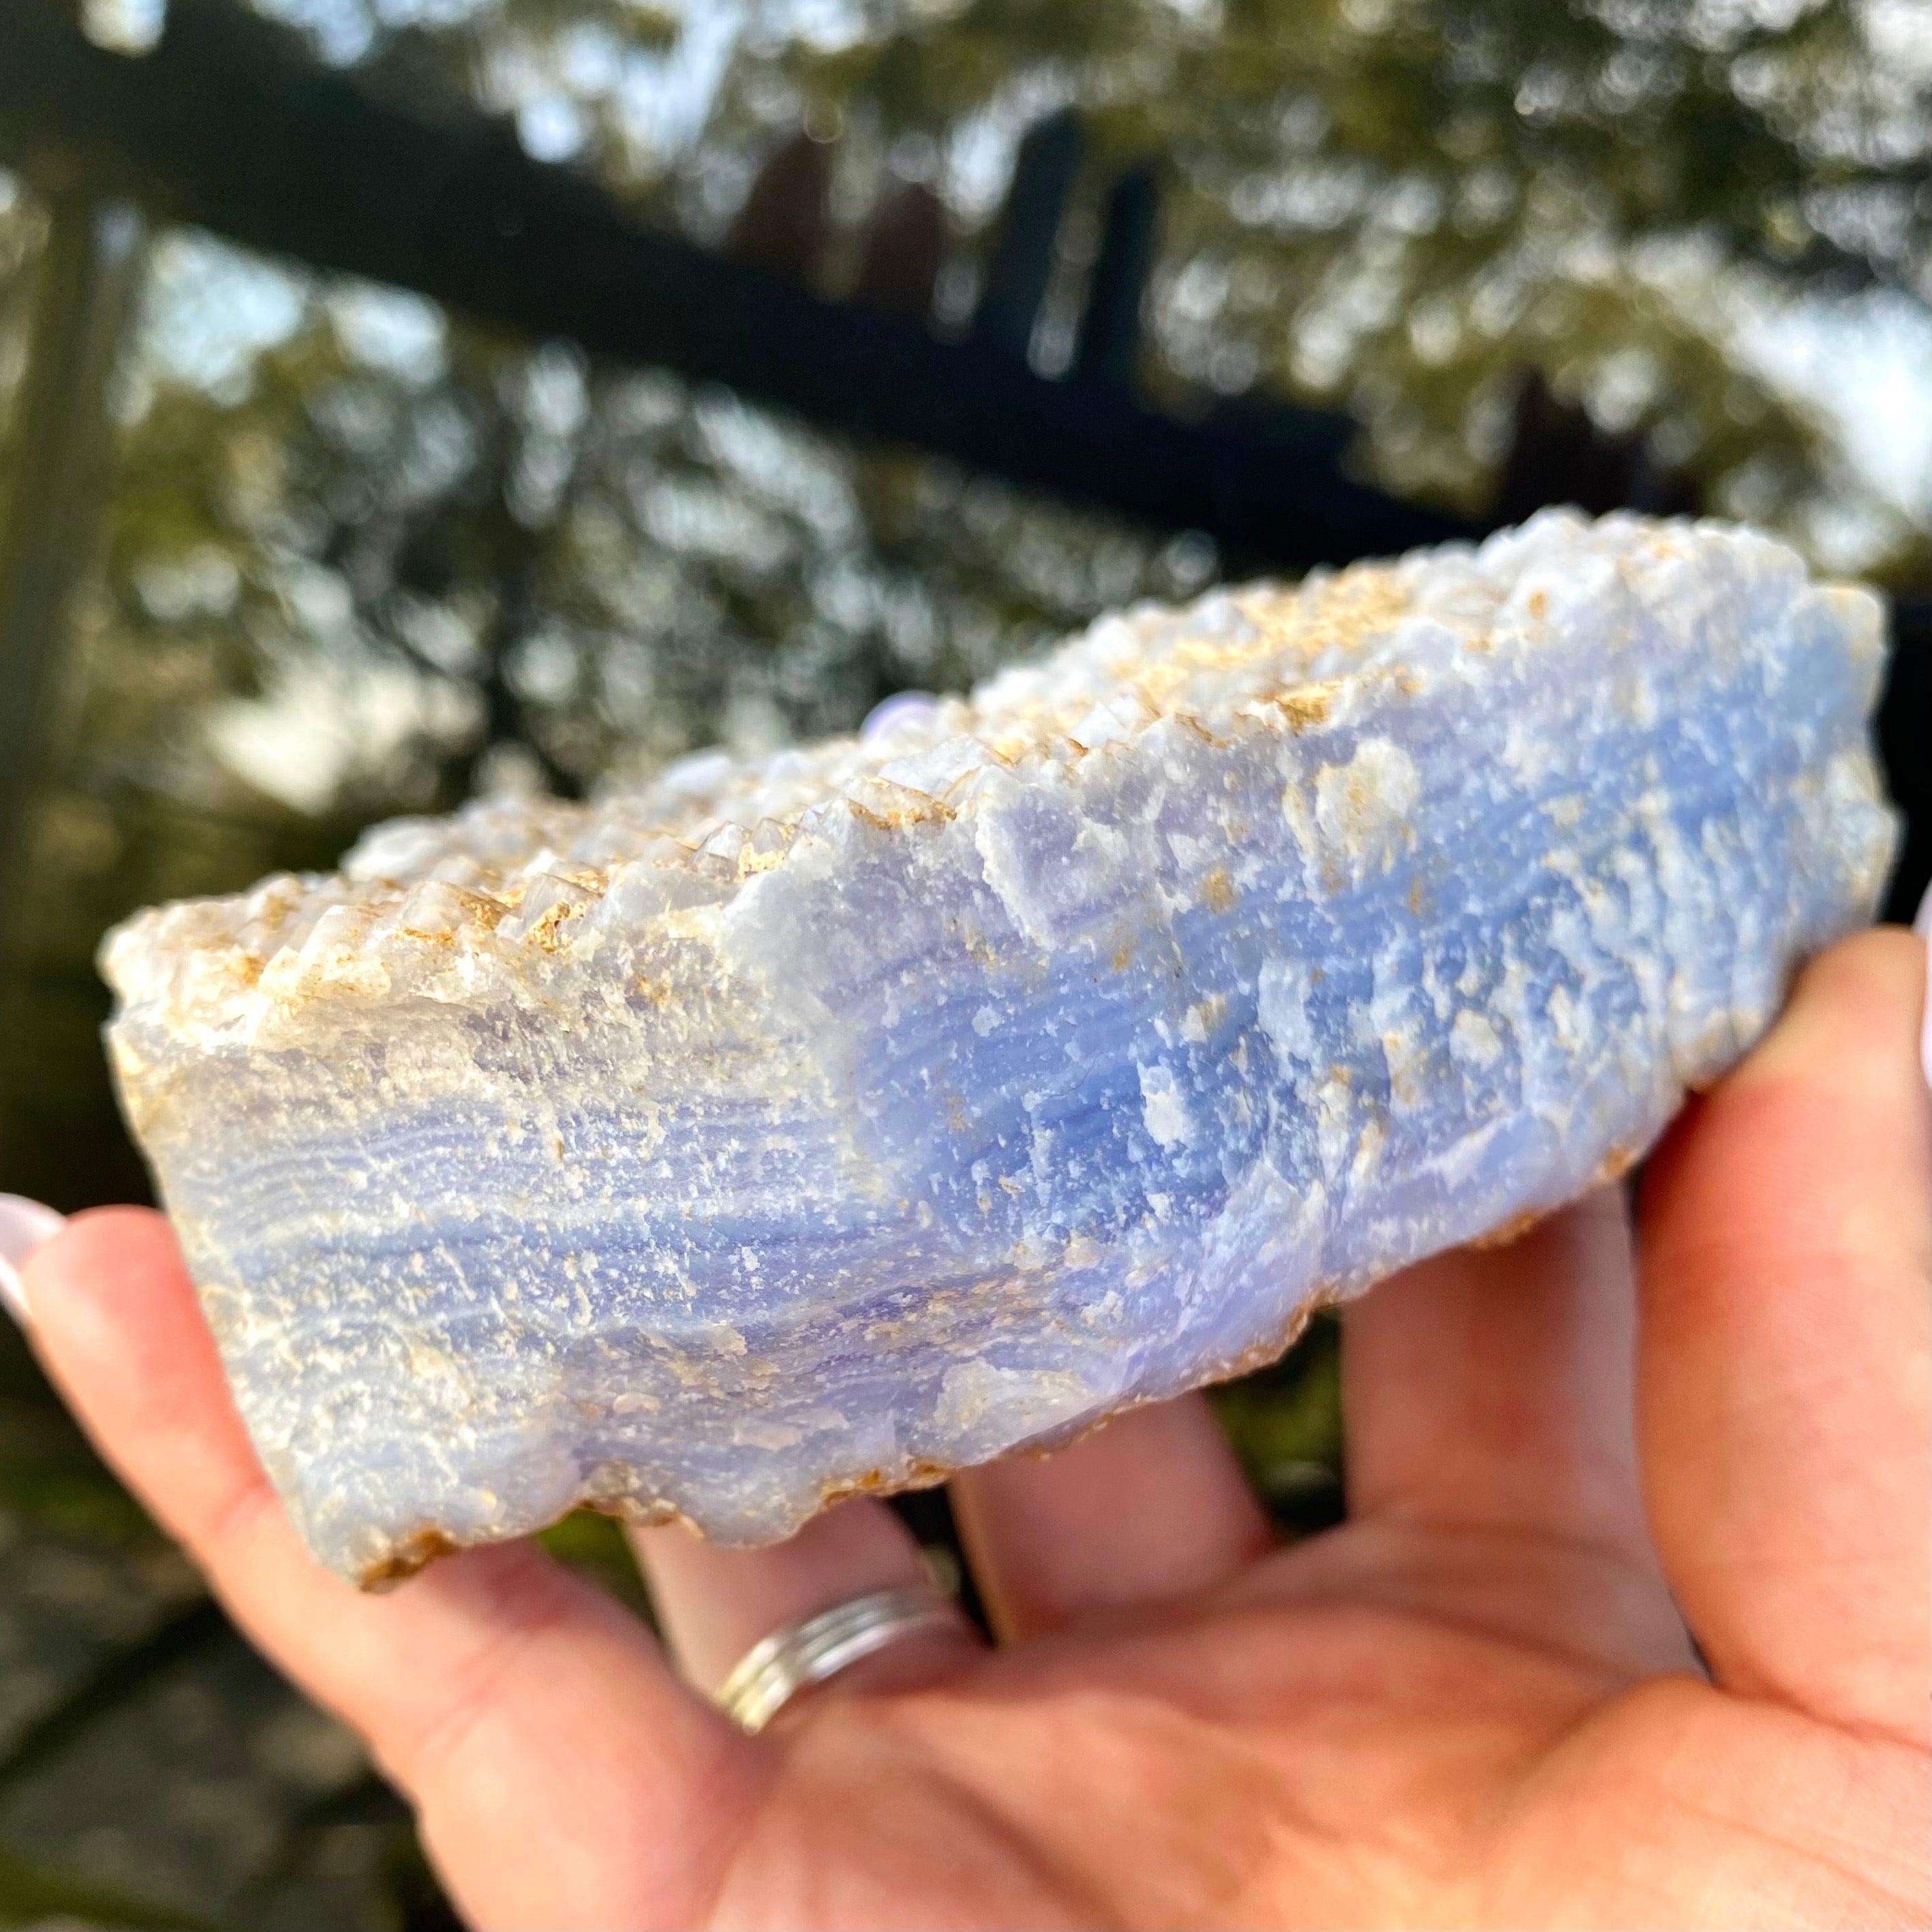 Blue Lace Agate Chunk - Ruby's Minerals